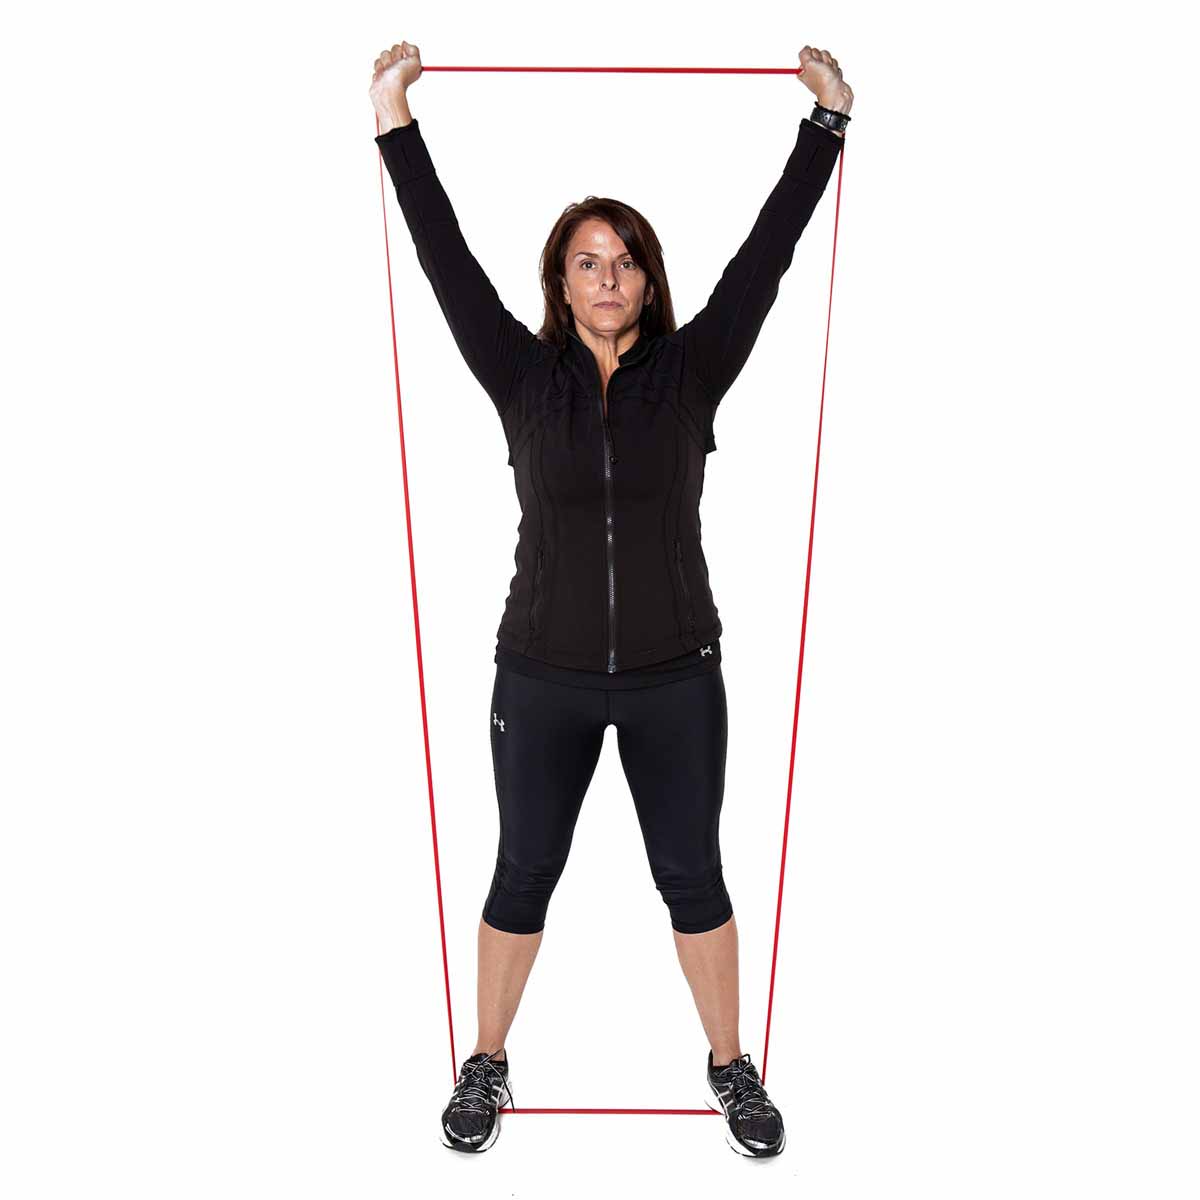 POWER BANDS PULL-UP ASSIST & RESISTANCE TRAINING